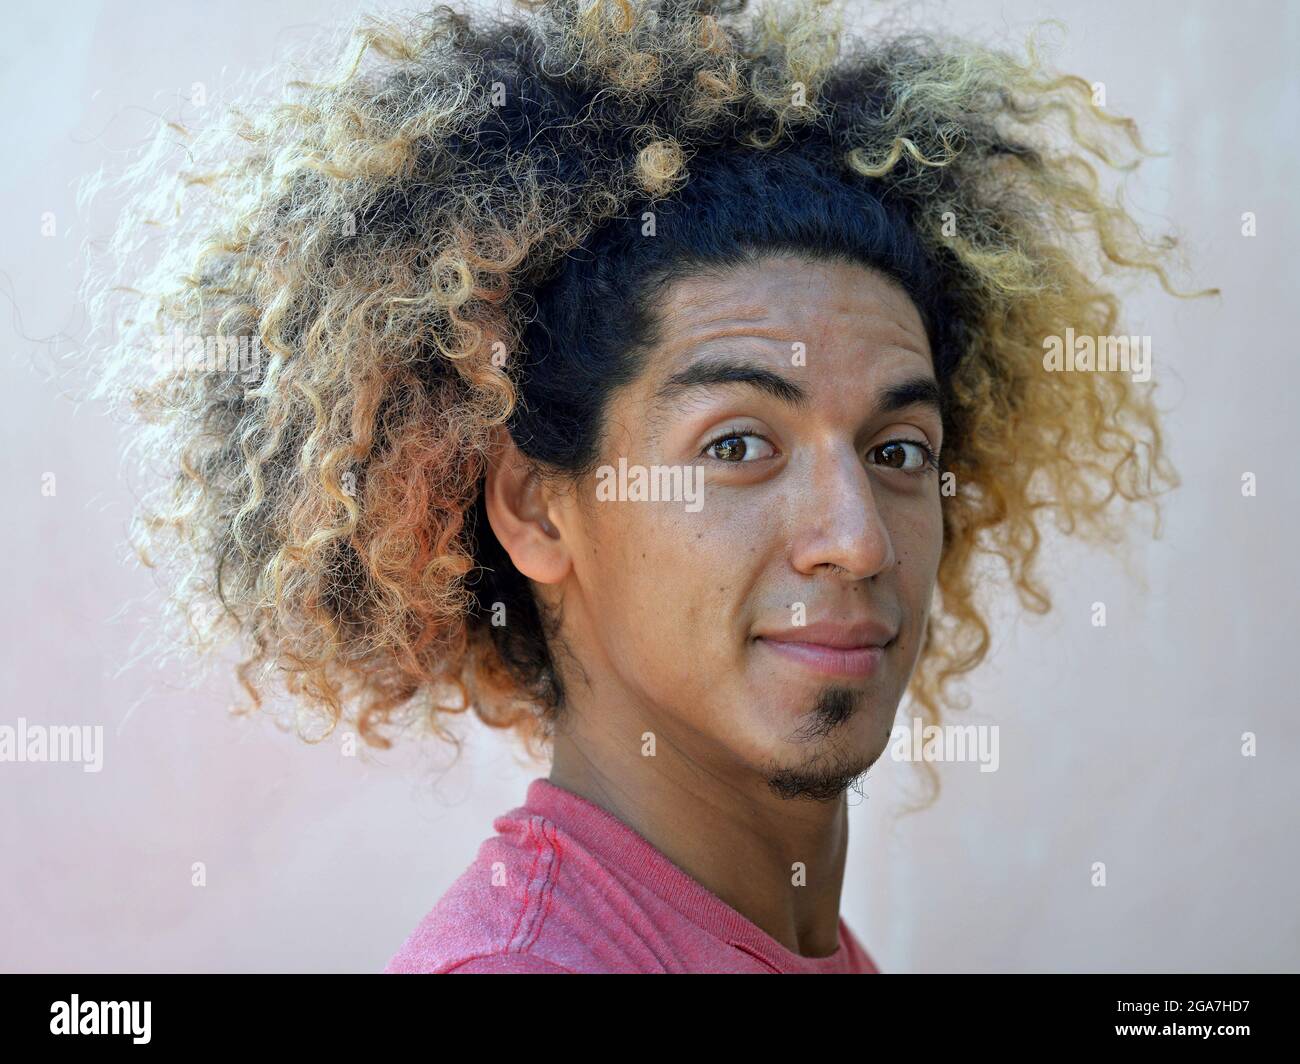 Young Latin American man with a shock of wild curly hair and blond dyed hair ends smiles with closed mouth at the camera. Stock Photo